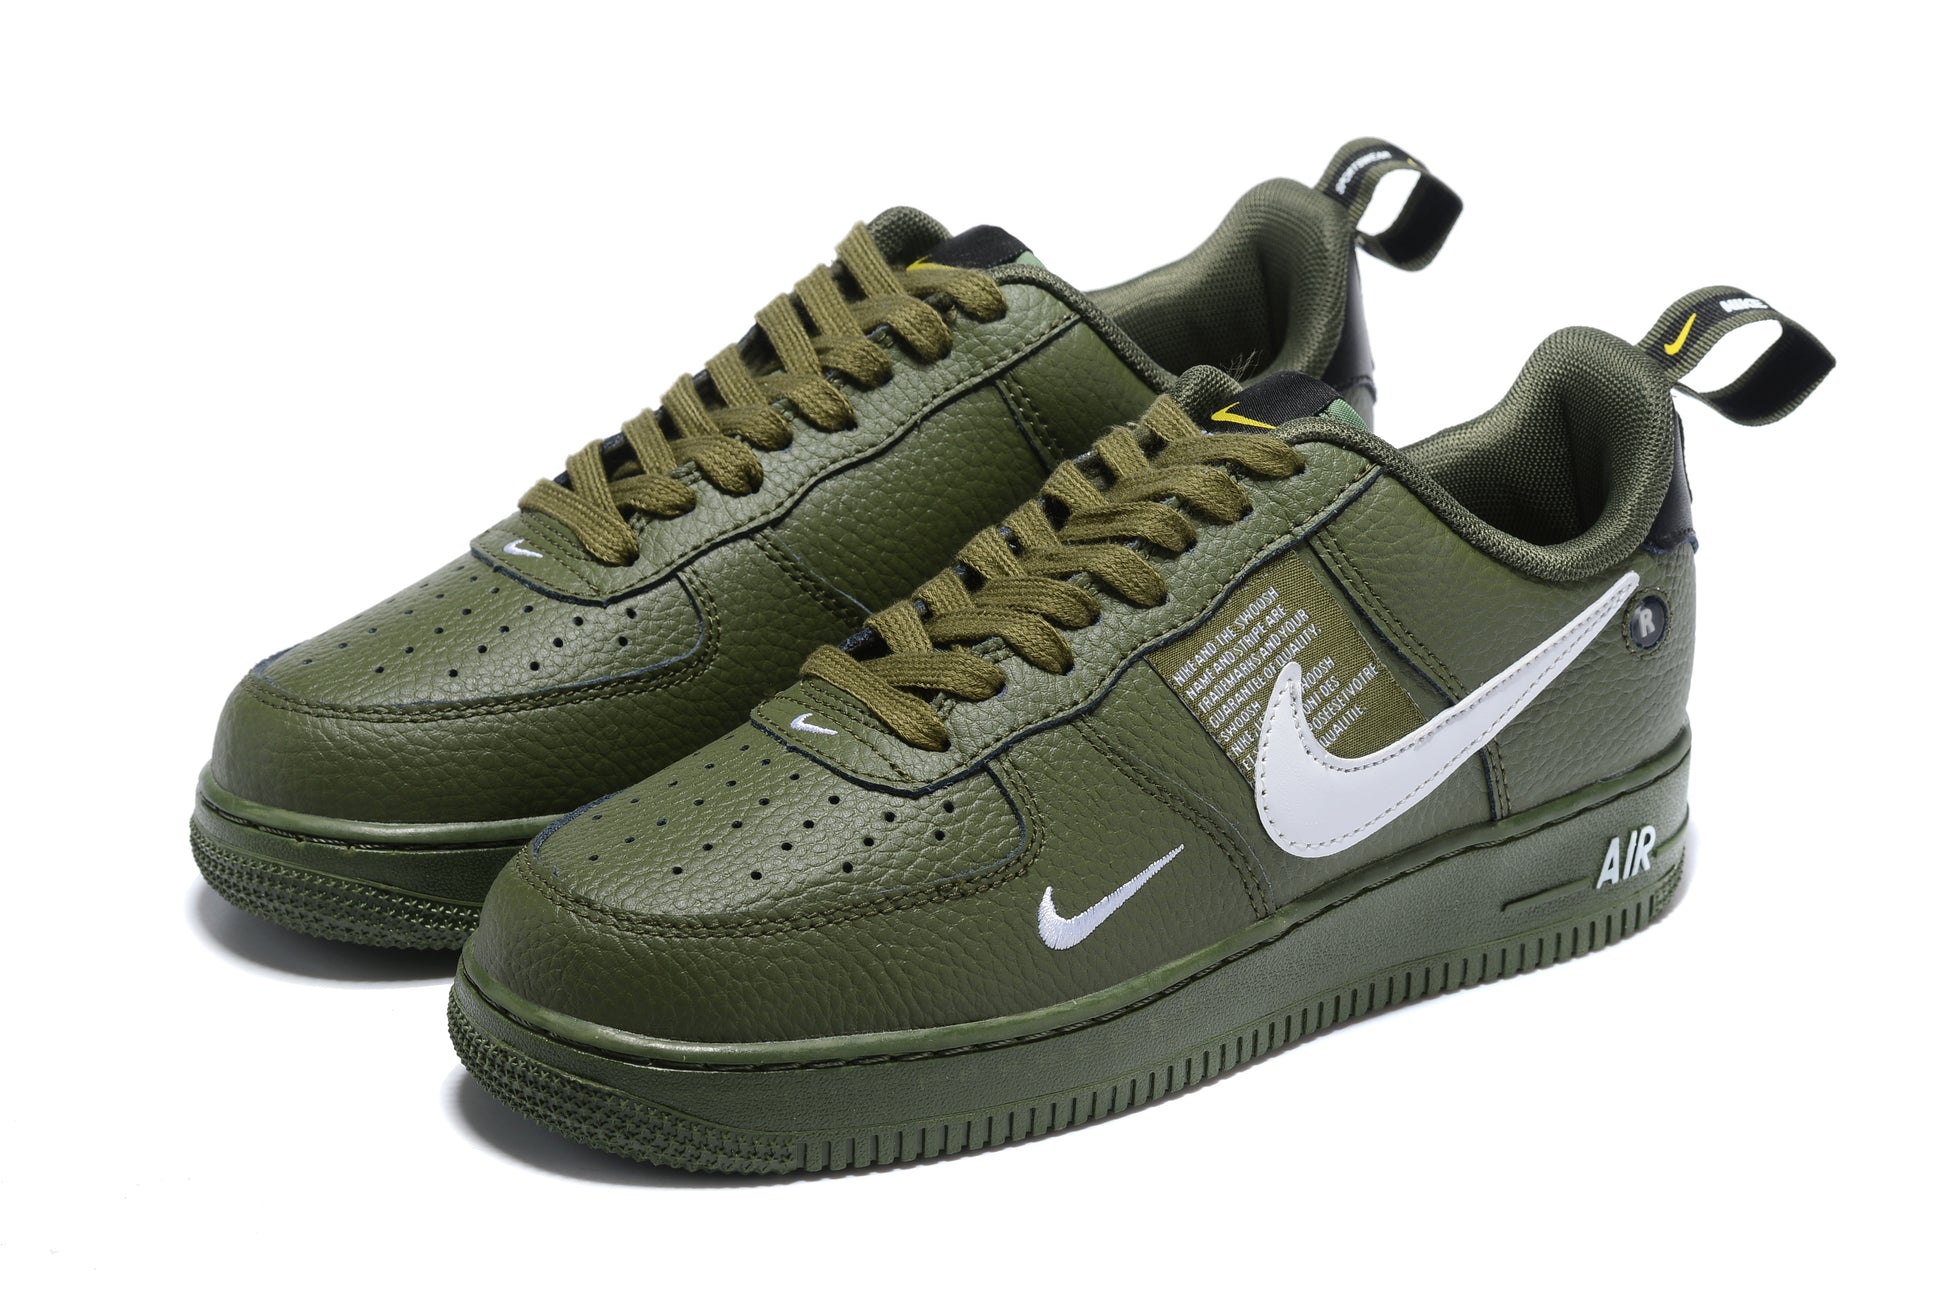 Nike Force 1 Low "Verde Militar" – The Foot Planet